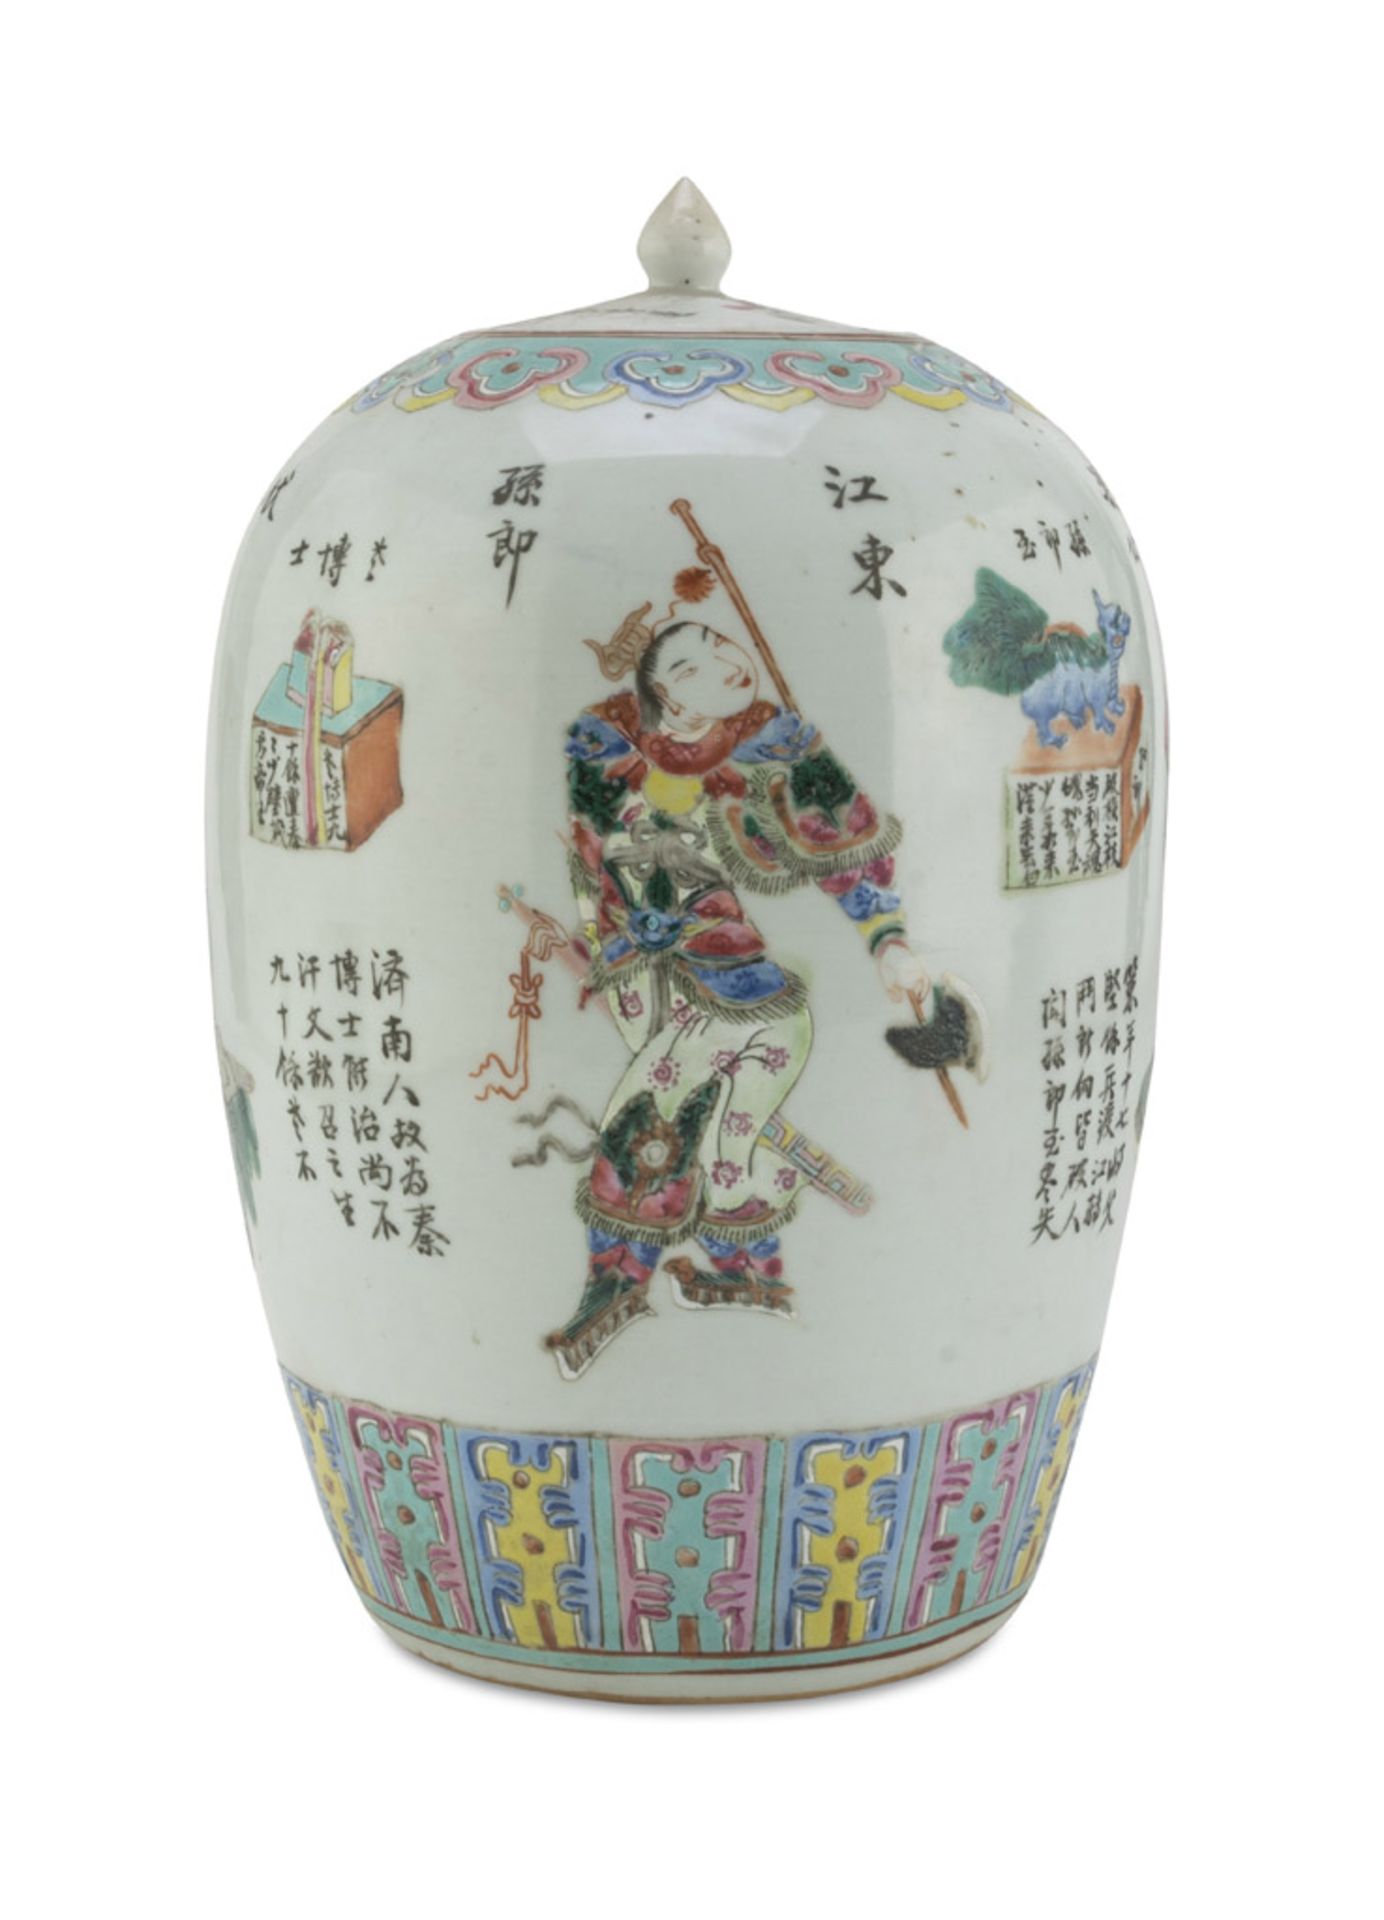 POLYCHROME ENAMELLED PORCELAIN POTICHE, CHINA 19TH CENTURY decorated with representations of